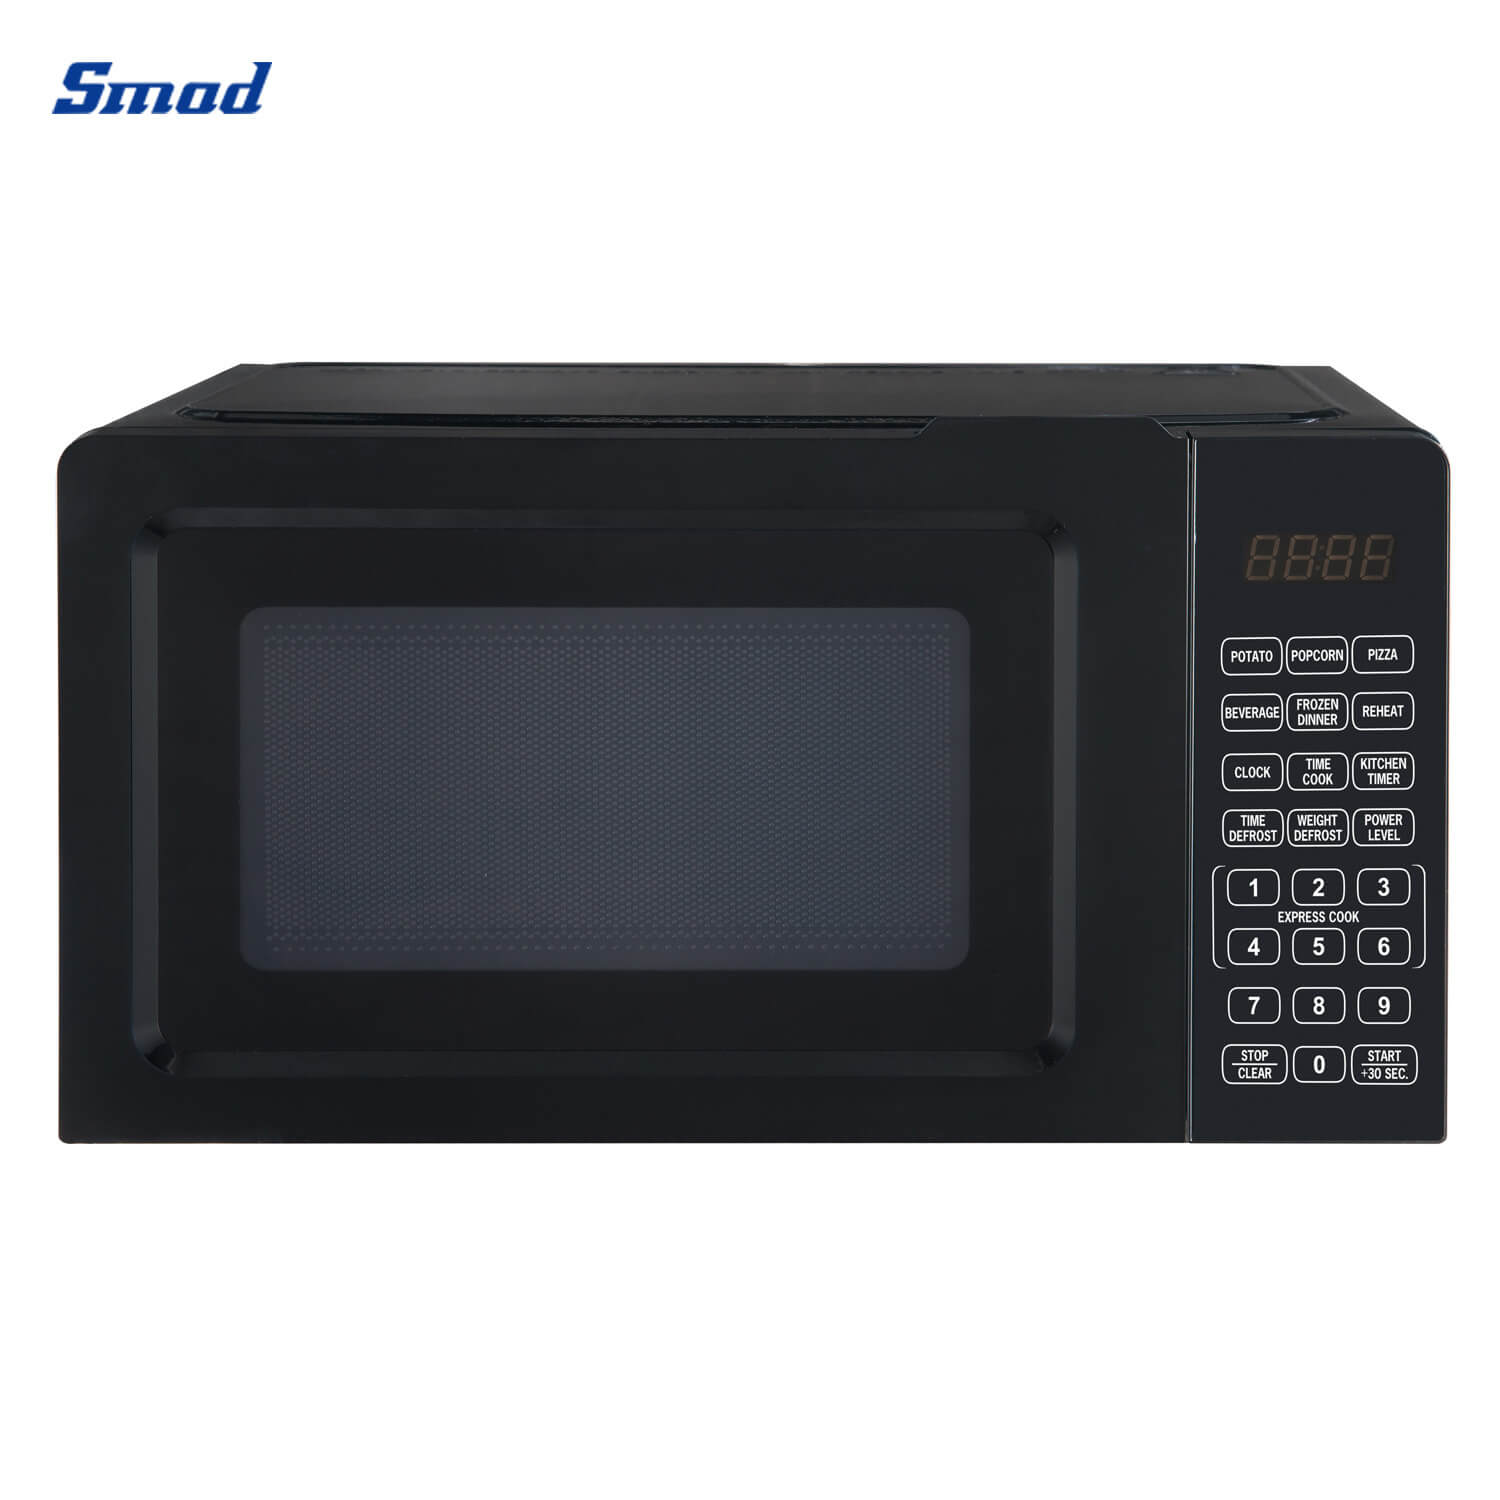 
Smad 20L Black / White Microwave Oven with 6 Auto Cooking Menus